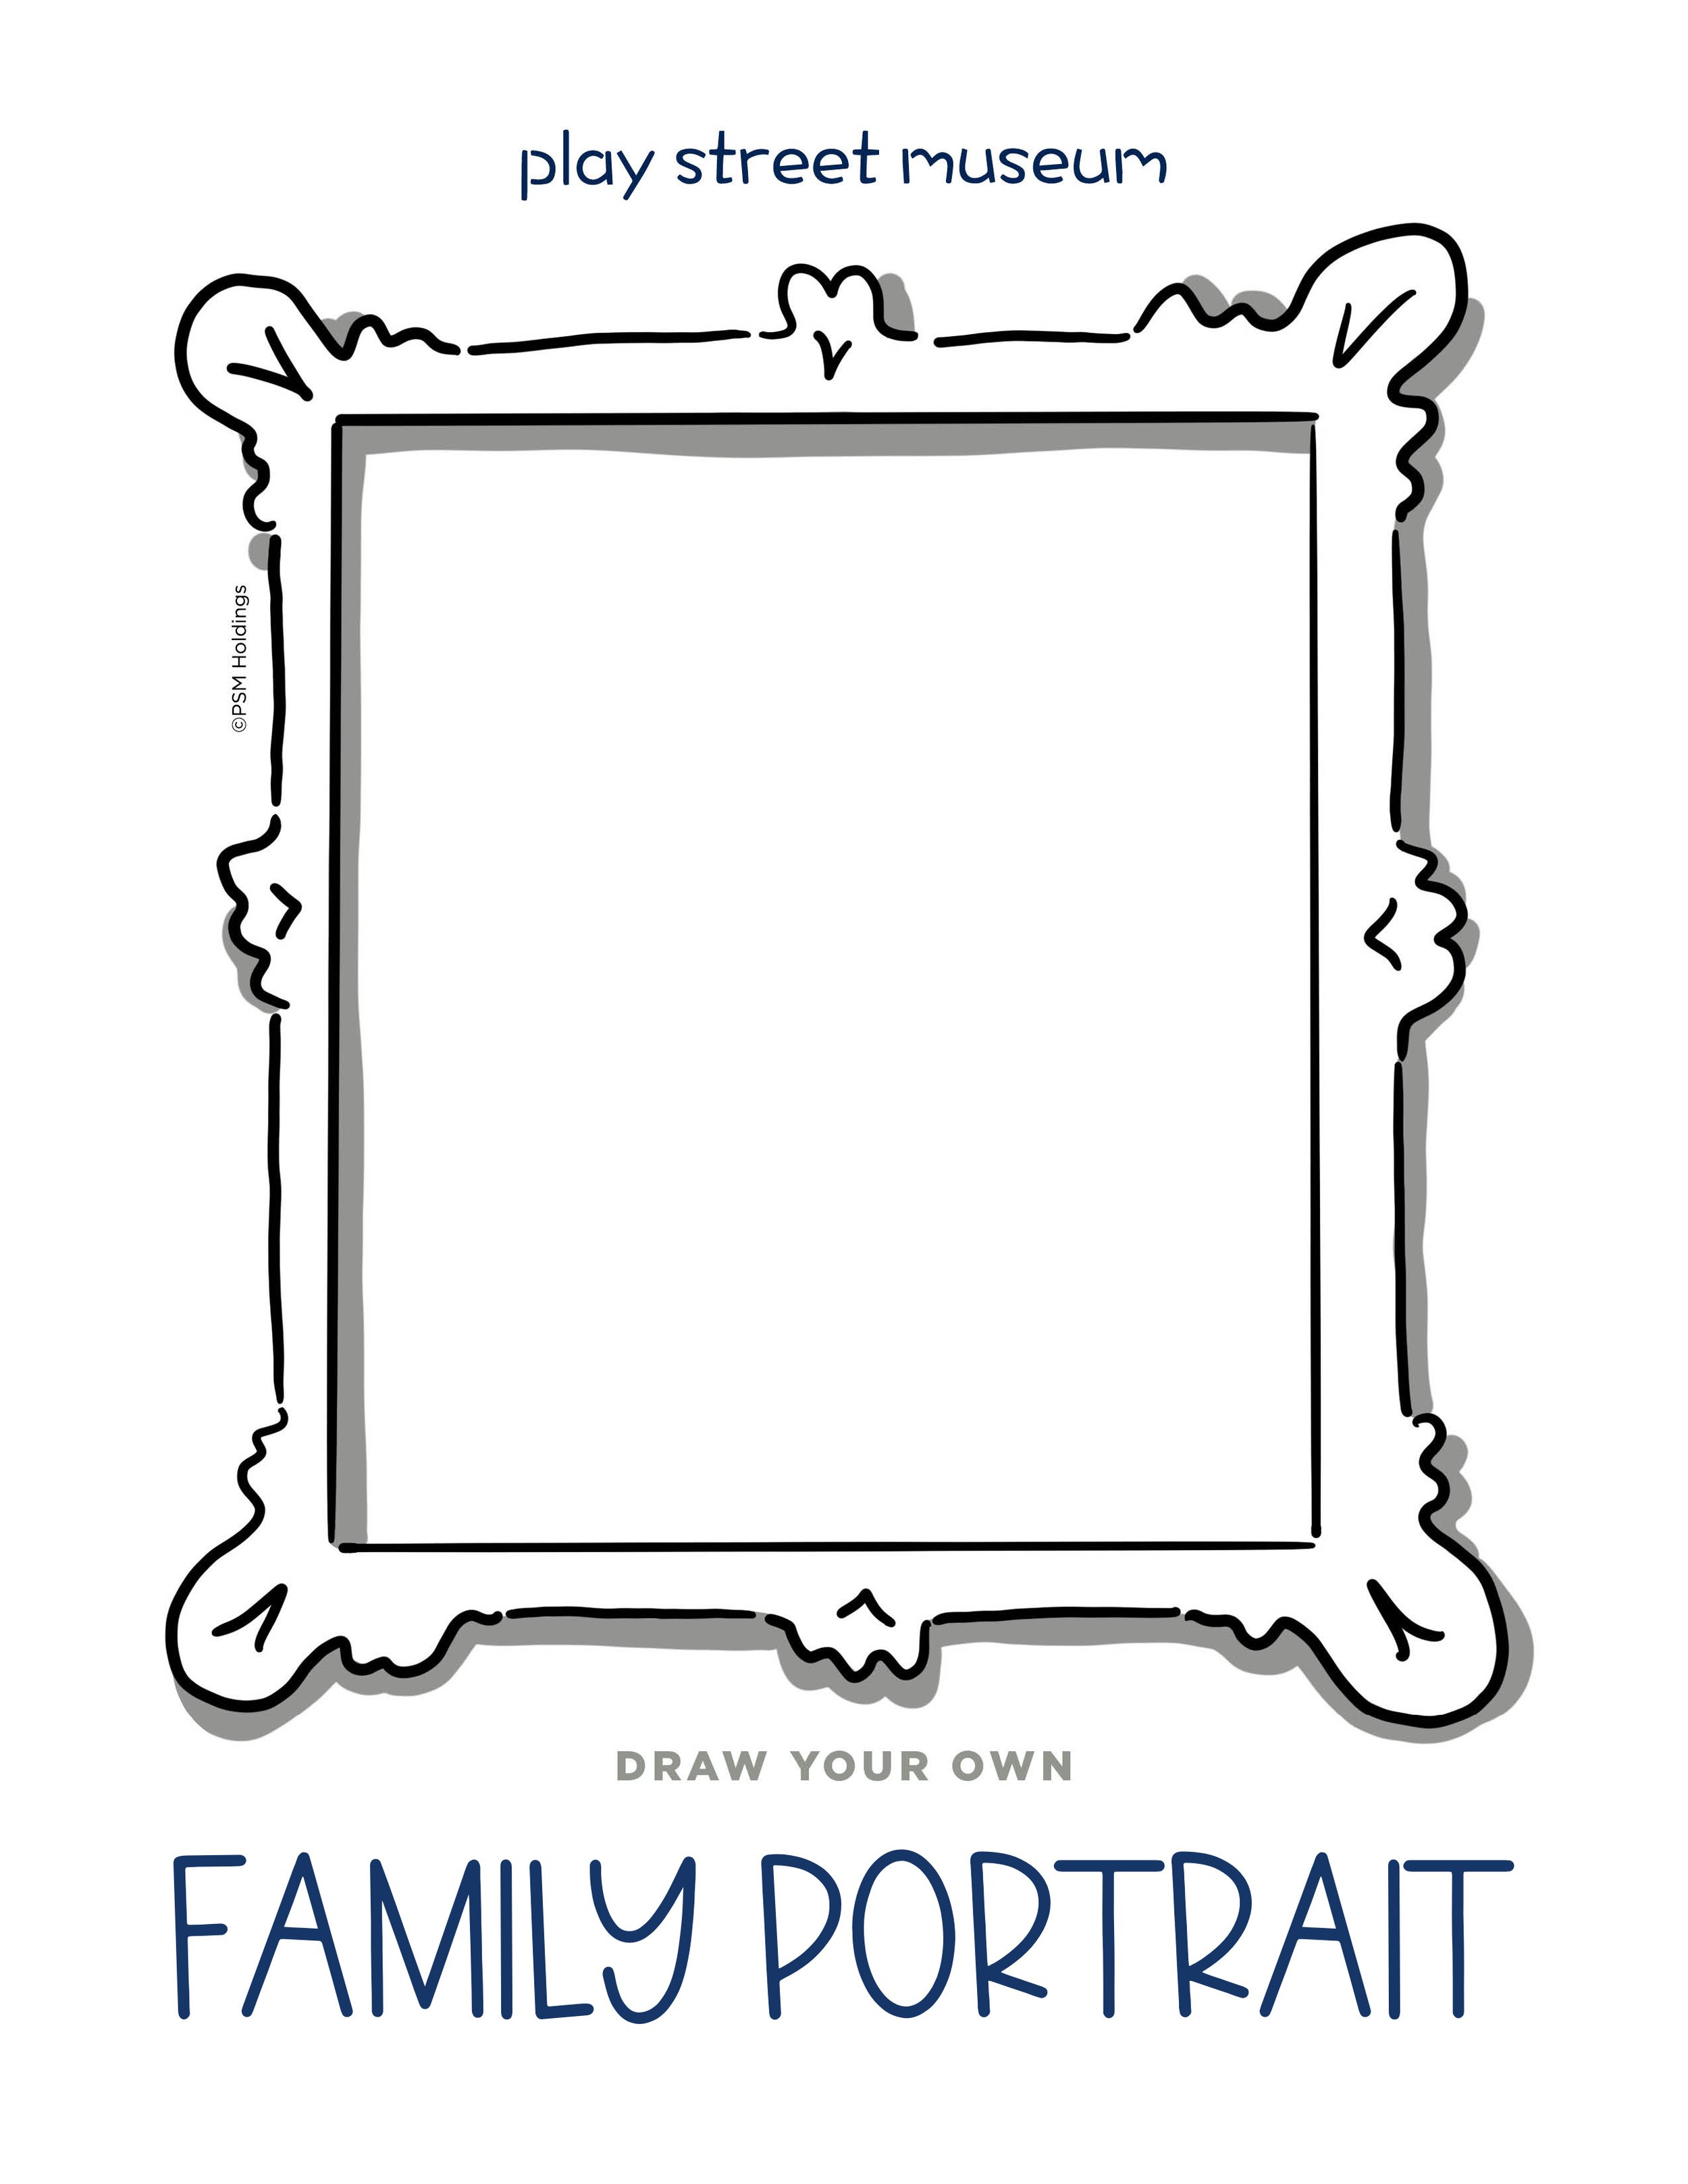 Draw Your Own Family Portrait- Free Printable — Play Street Museum